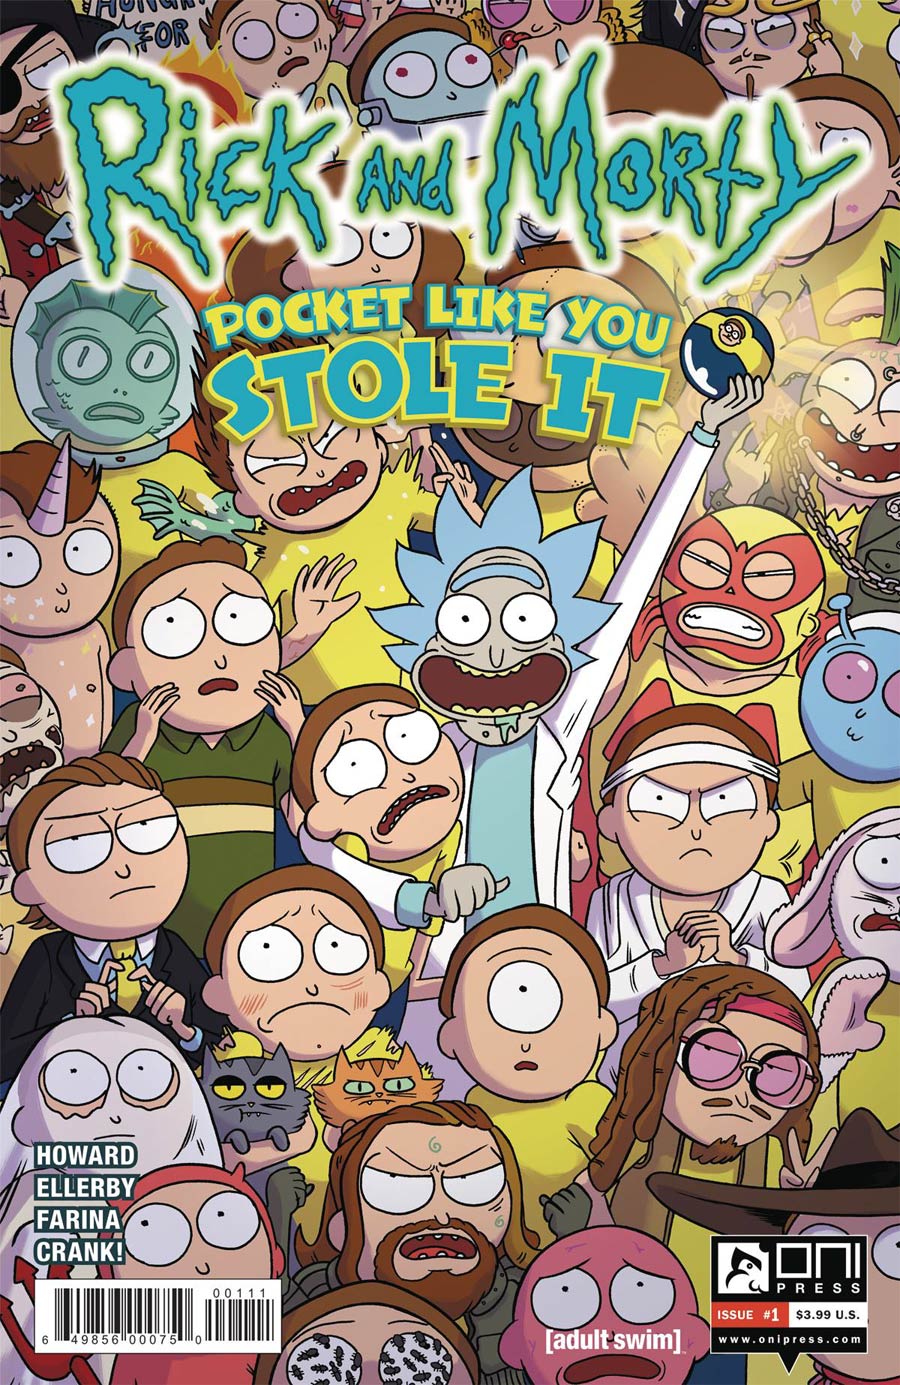 Rick And Morty Pocket Like You Stole It #1 Cover A Regular Katy Farina Cover